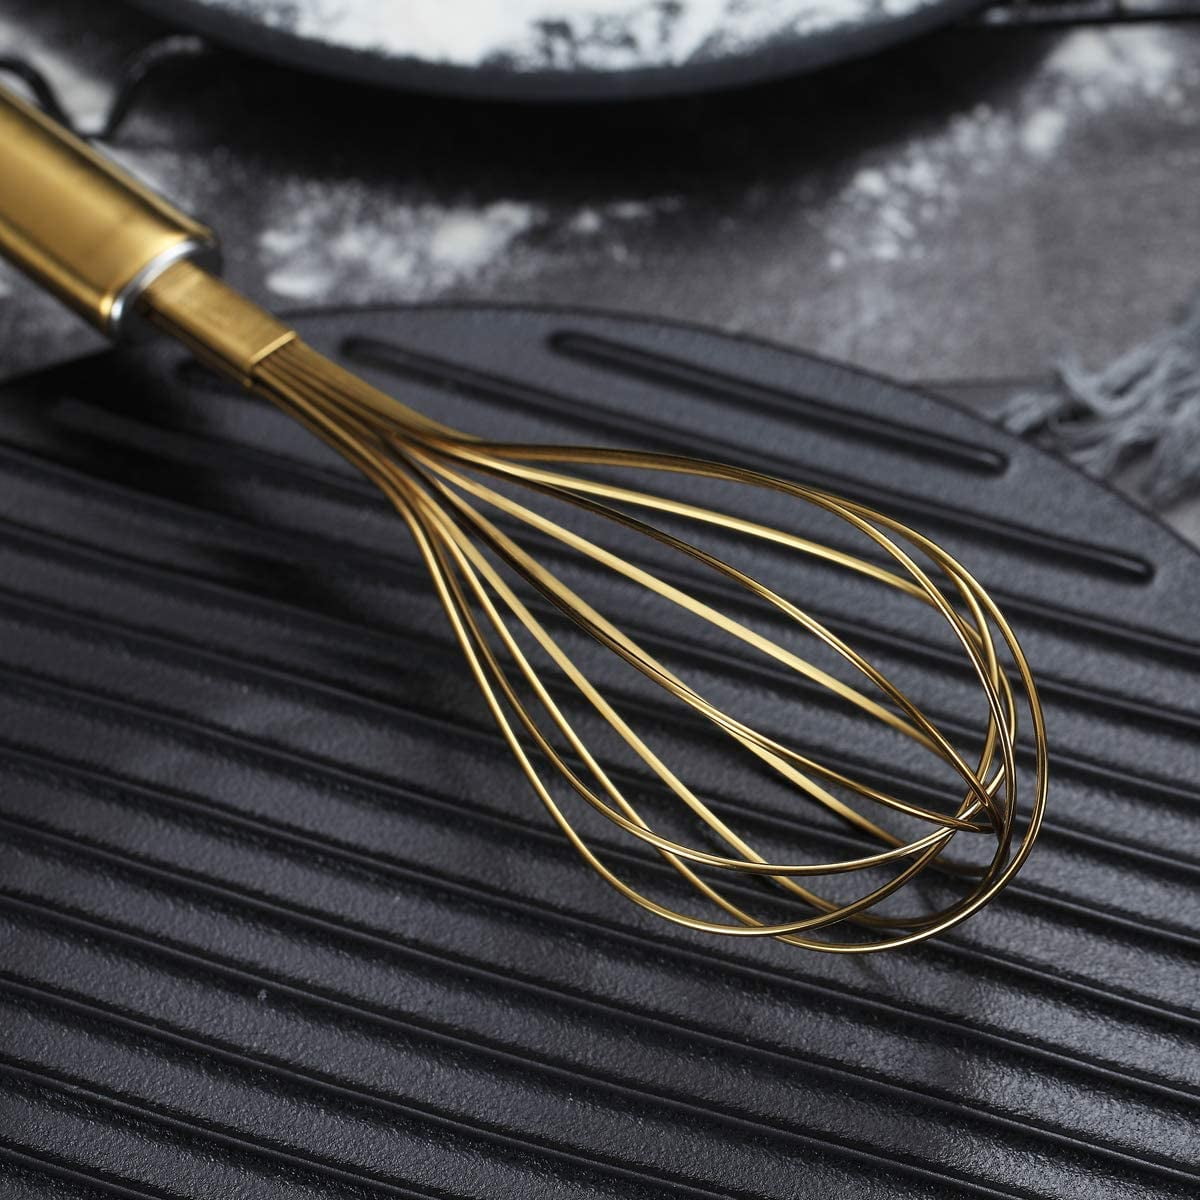 Reanea Rainbow Whisk Set Pack of 3 Stainless Steel 8 inch 10 inch 12 inch Whisks for Cooking, Beater, Kitchen Wire Wisk, Size: 33.6x9.6x7cm